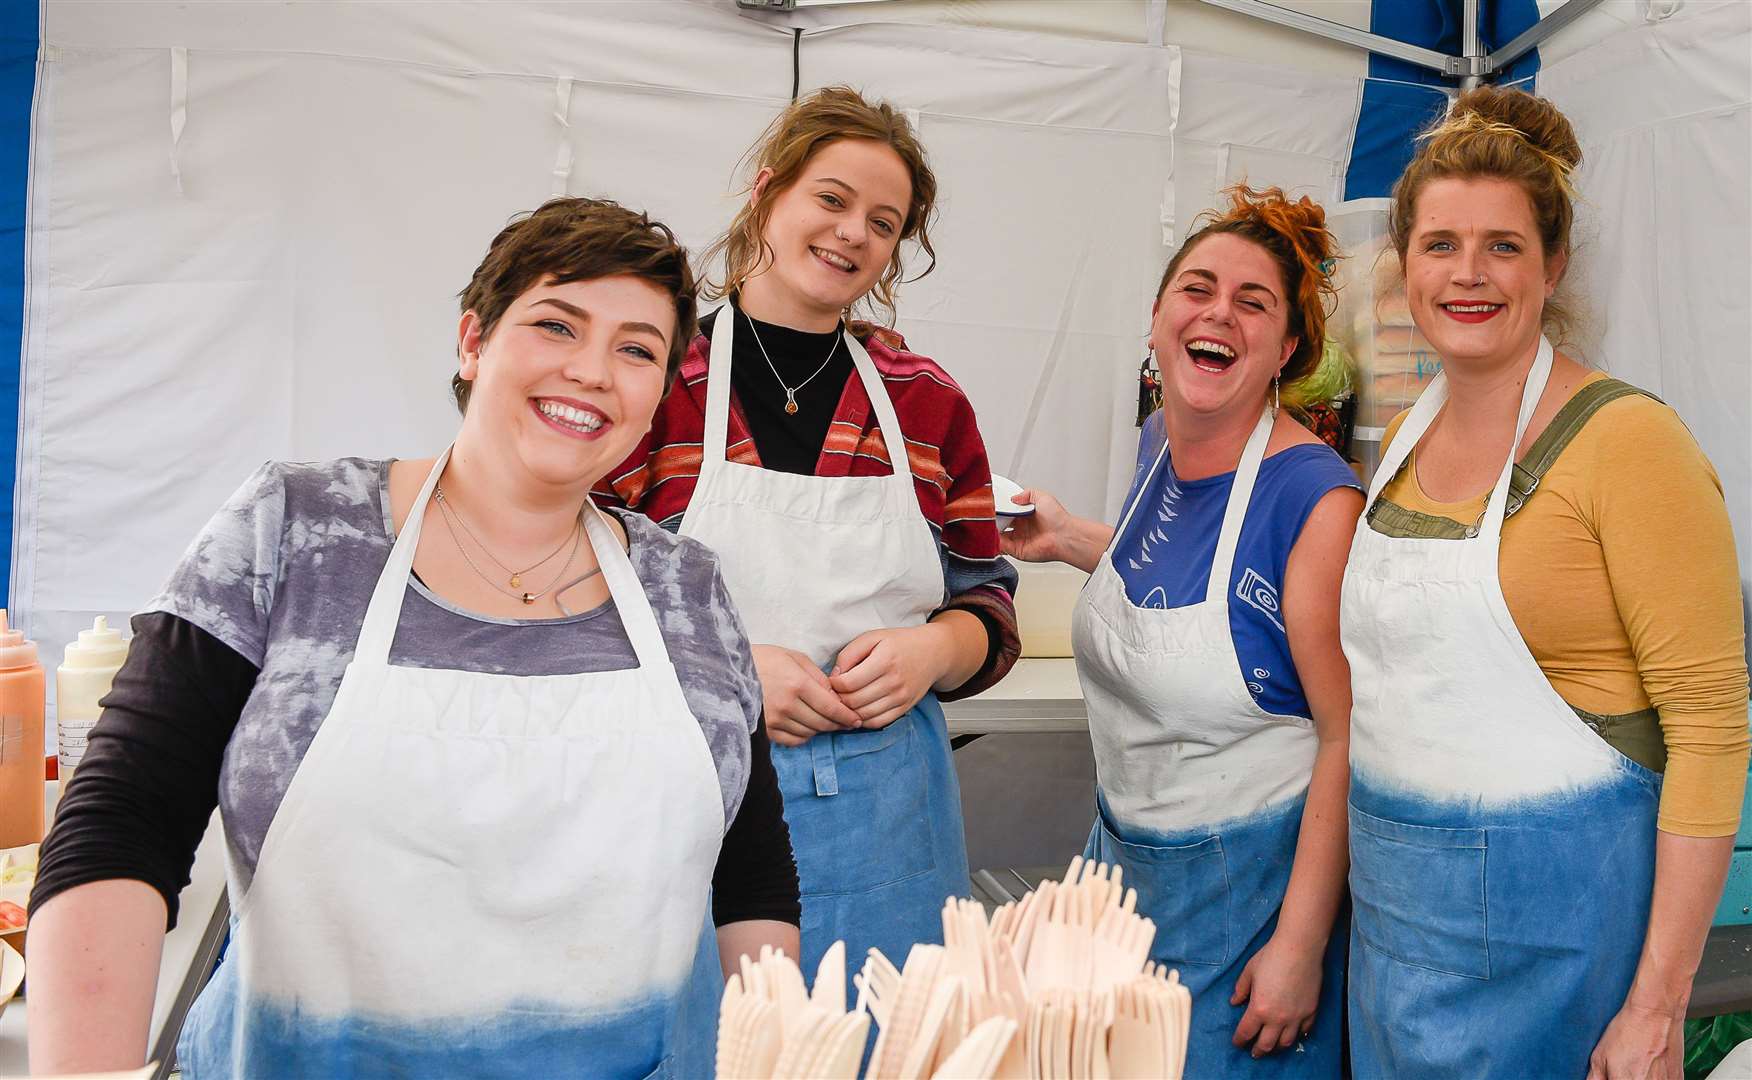 Fun at last year's Broadstairs Food Festival Picture: Alan Langley